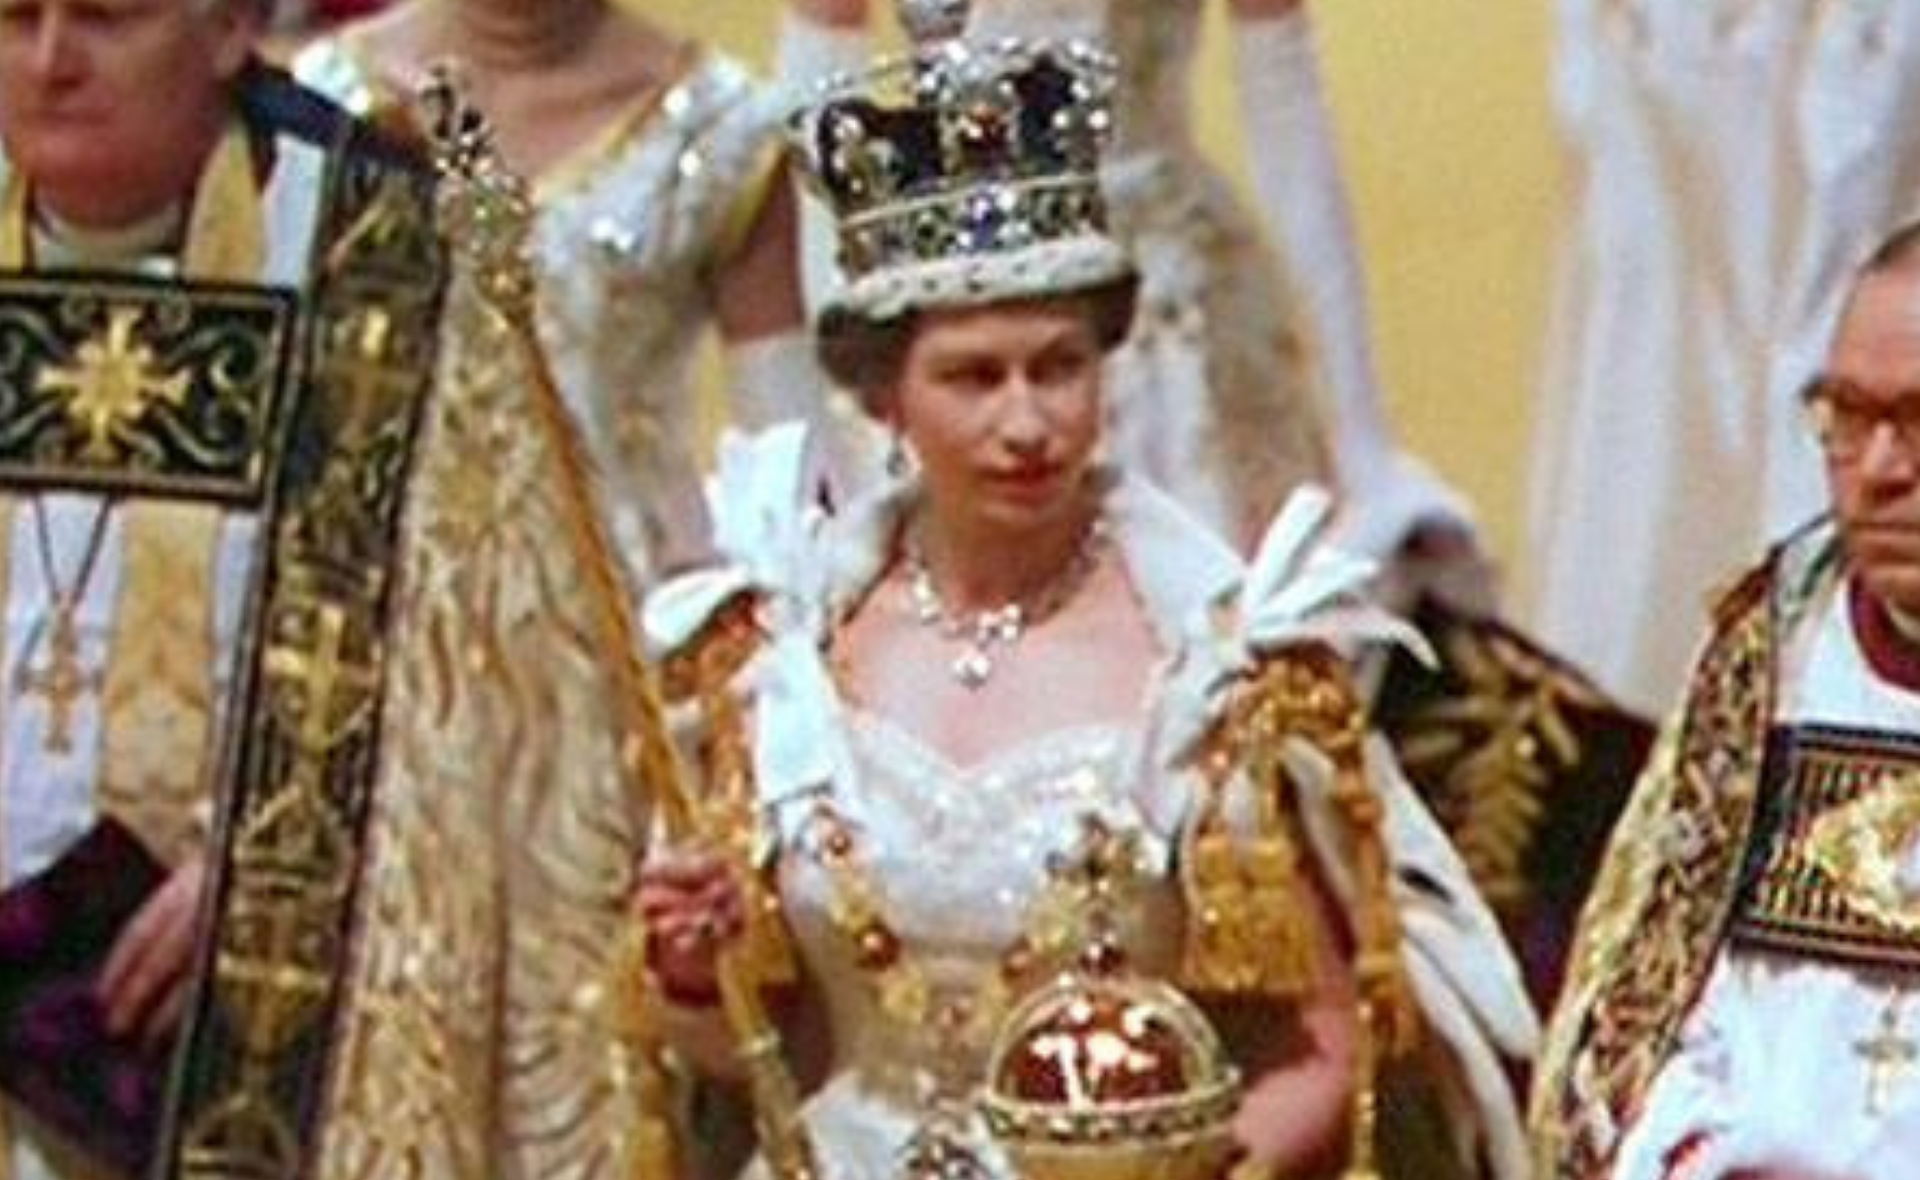 70 years on the throne: How Queen Elizabeth II’s coronation made history in more ways than one